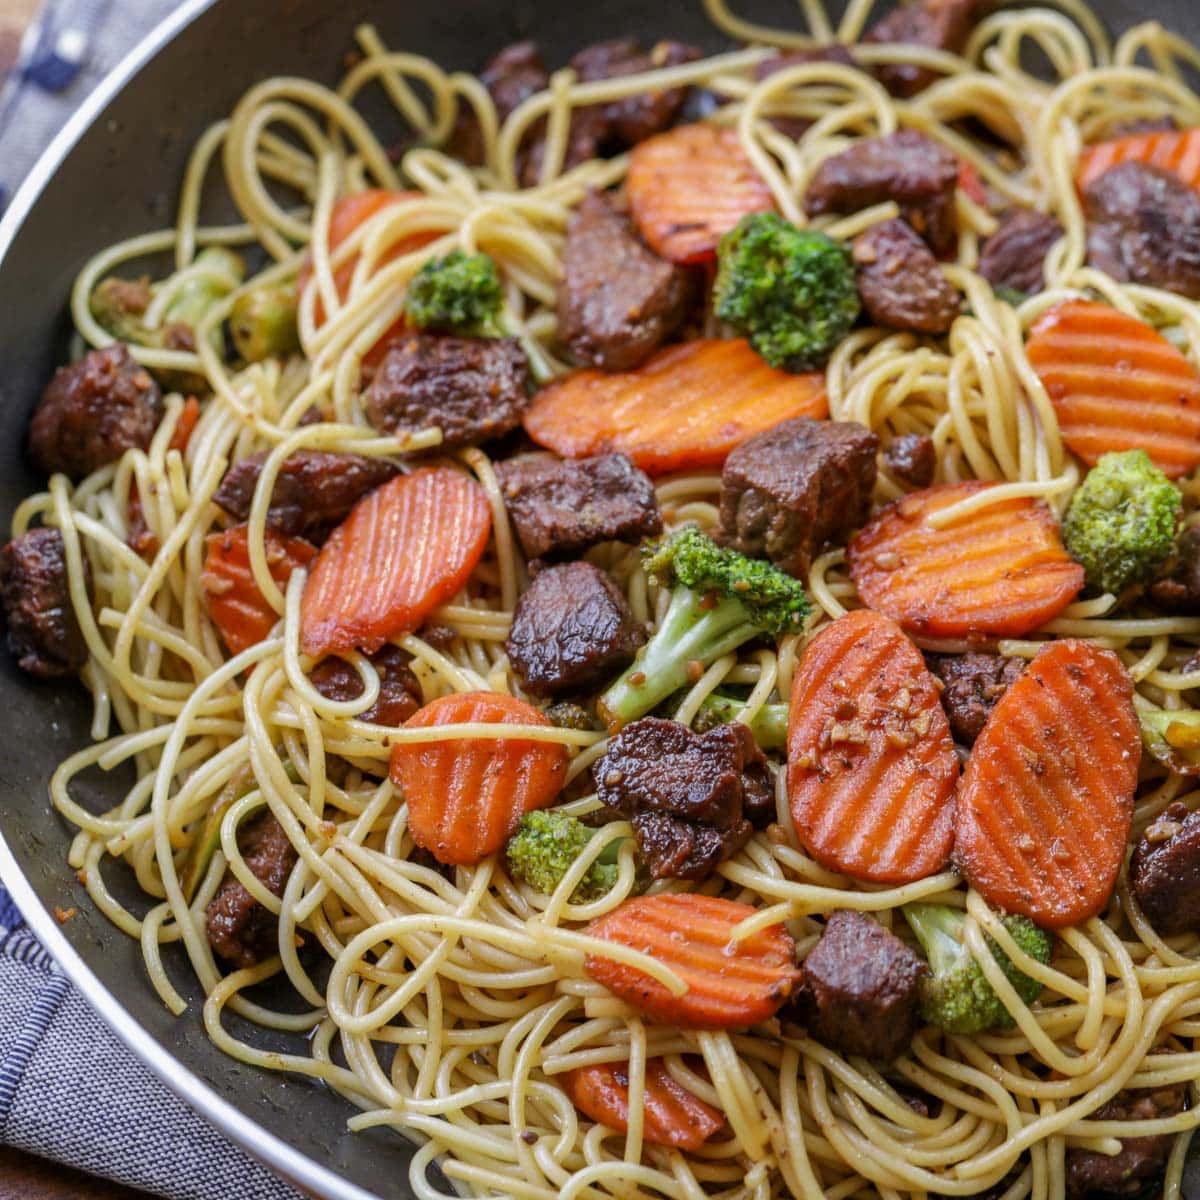 Quick dinner ideas - beef lo mein in a stir fry pan.